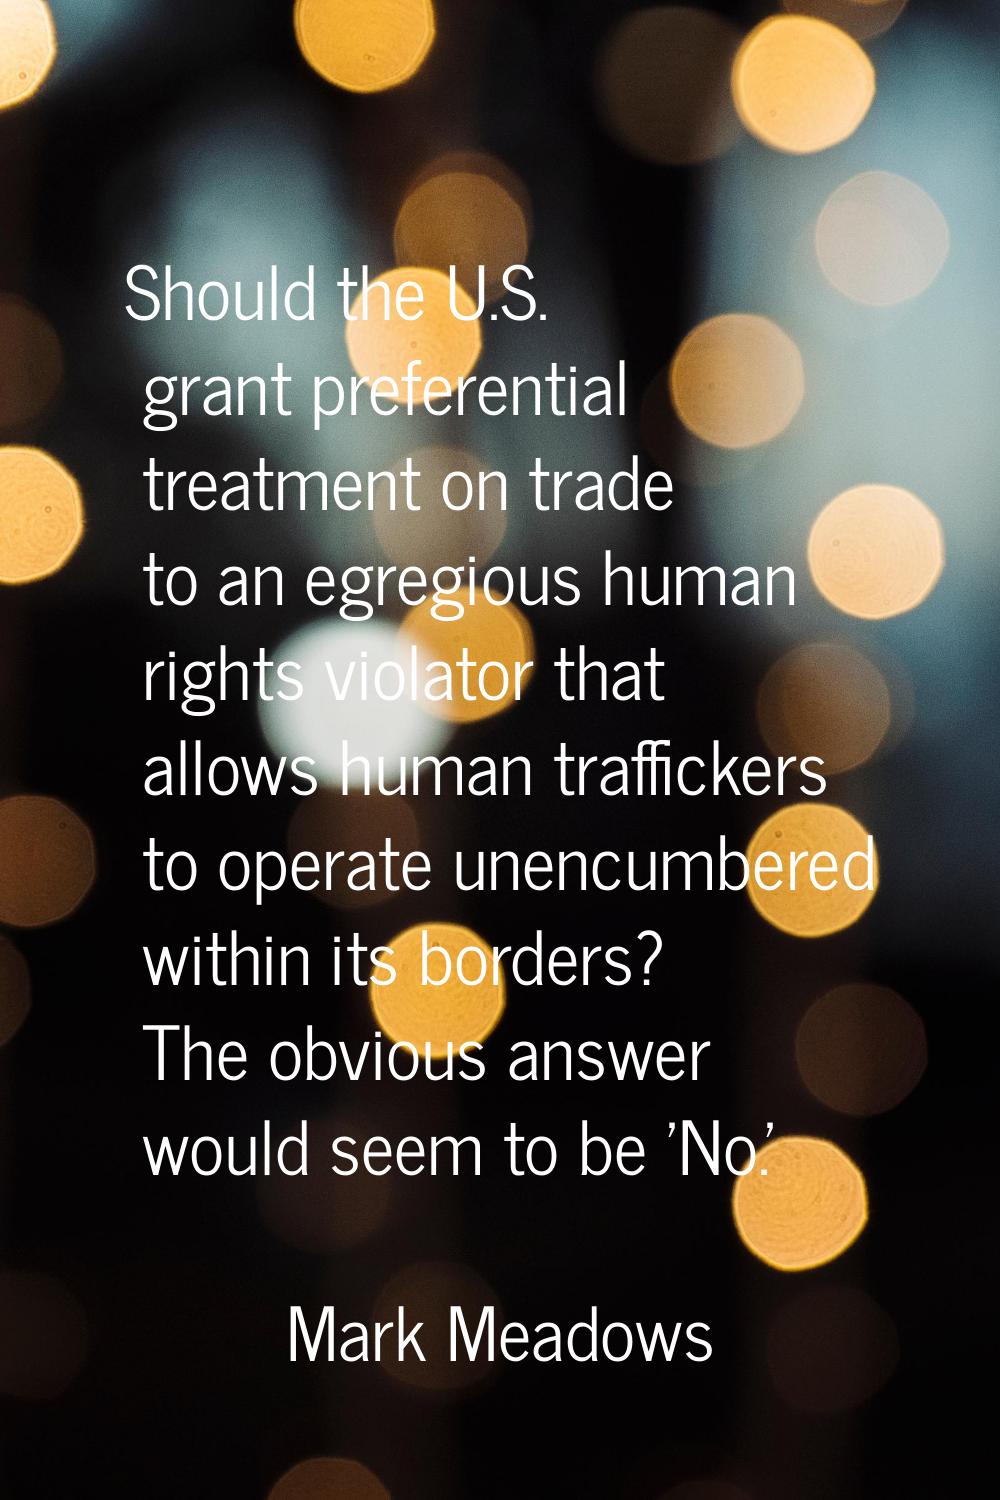 Should the U.S. grant preferential treatment on trade to an egregious human rights violator that al